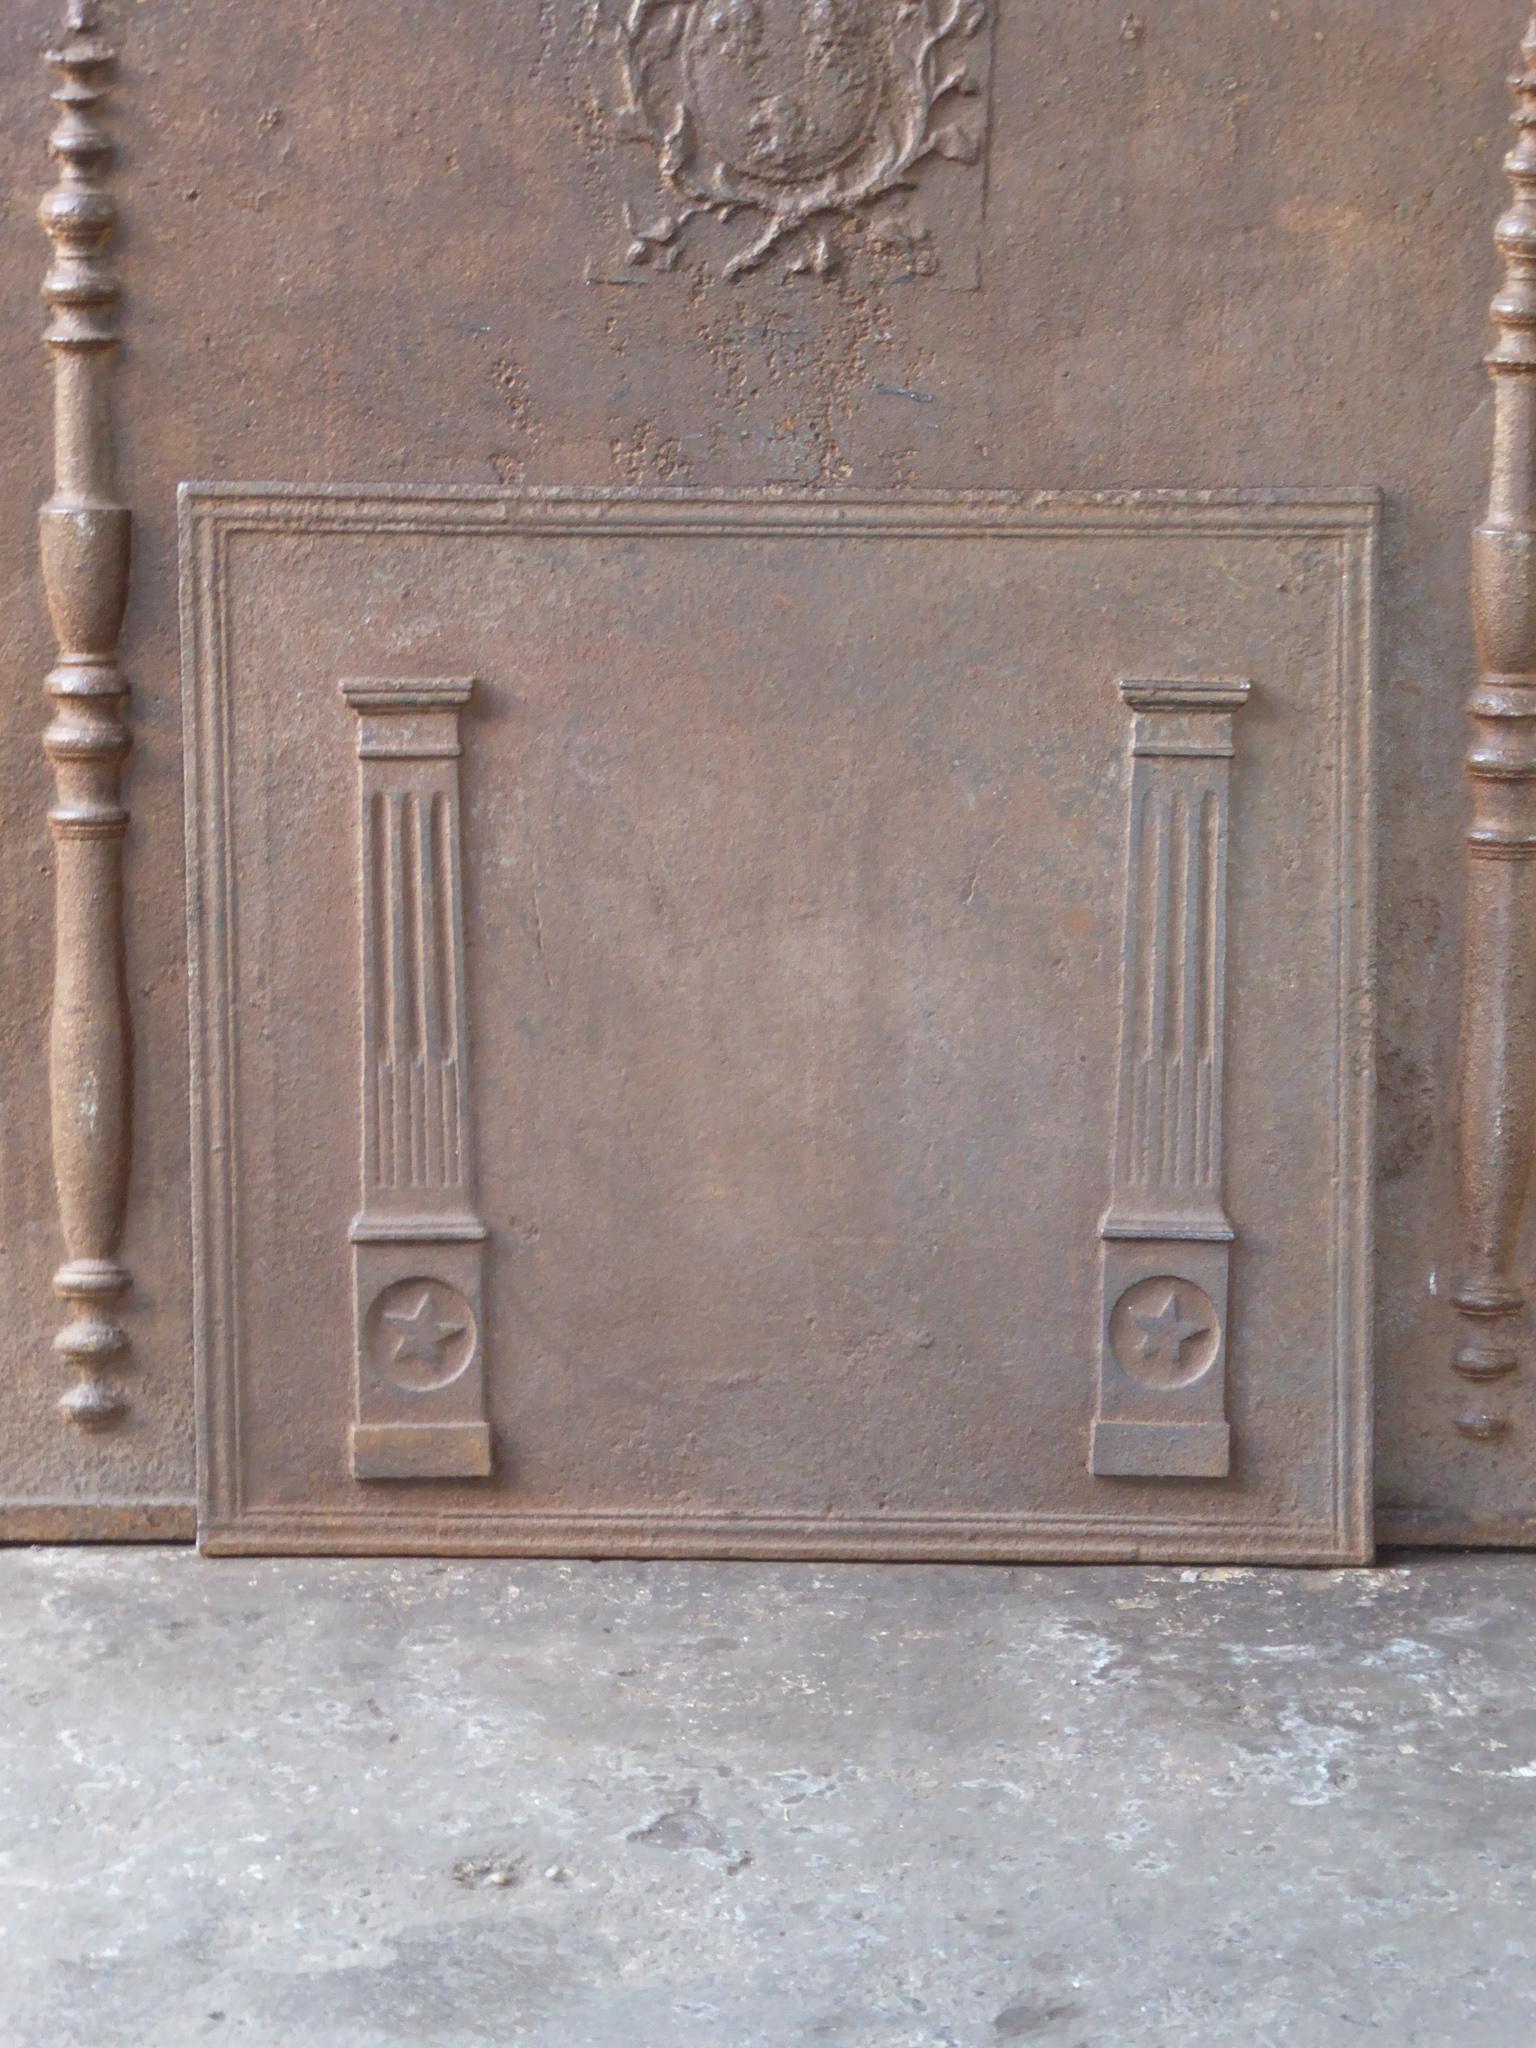 19th Century French neoclassical fireback with two pillars of freedom. The pillars symbolize the value liberty, one of the three values of the French revolution. 

The fireback is made of cast iron and has a natural brown patina. Upon request it